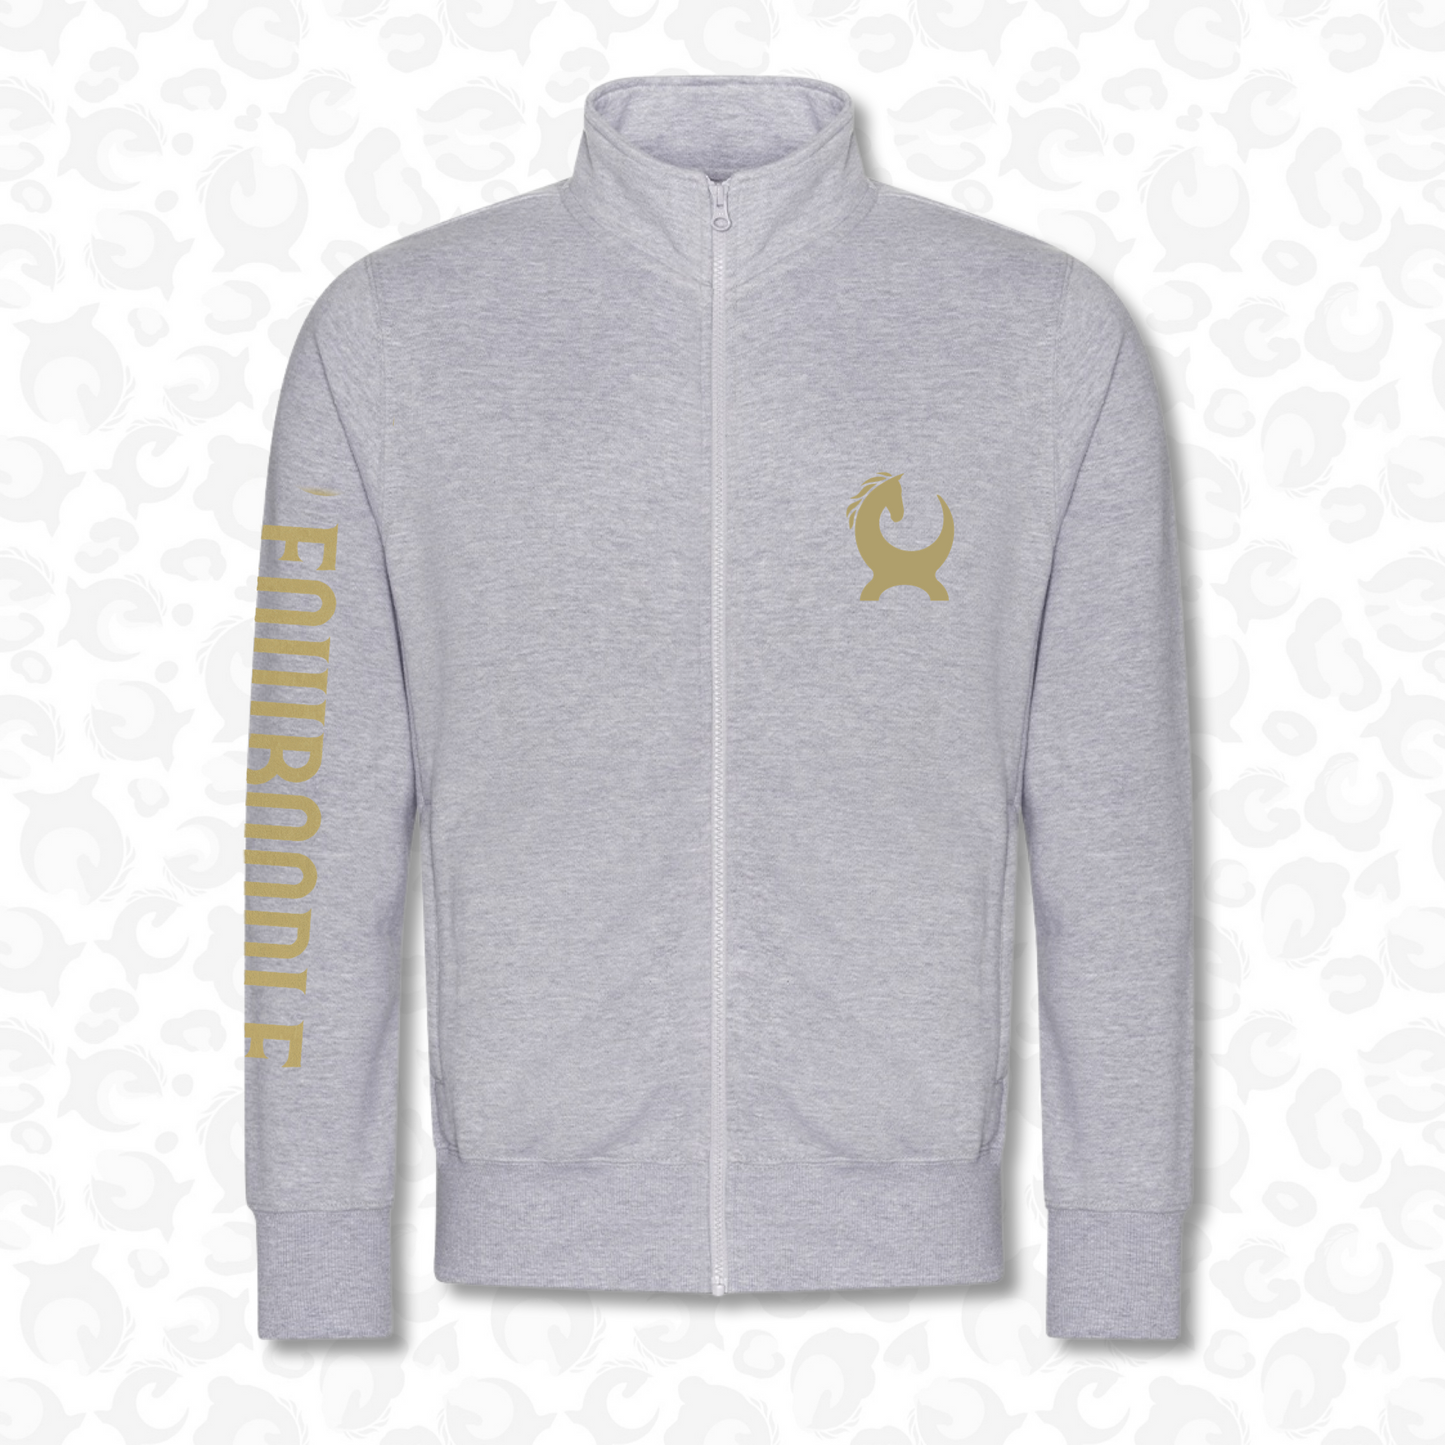 Equiboodle Charlie Zip Up Sweater - Grey Team EQ